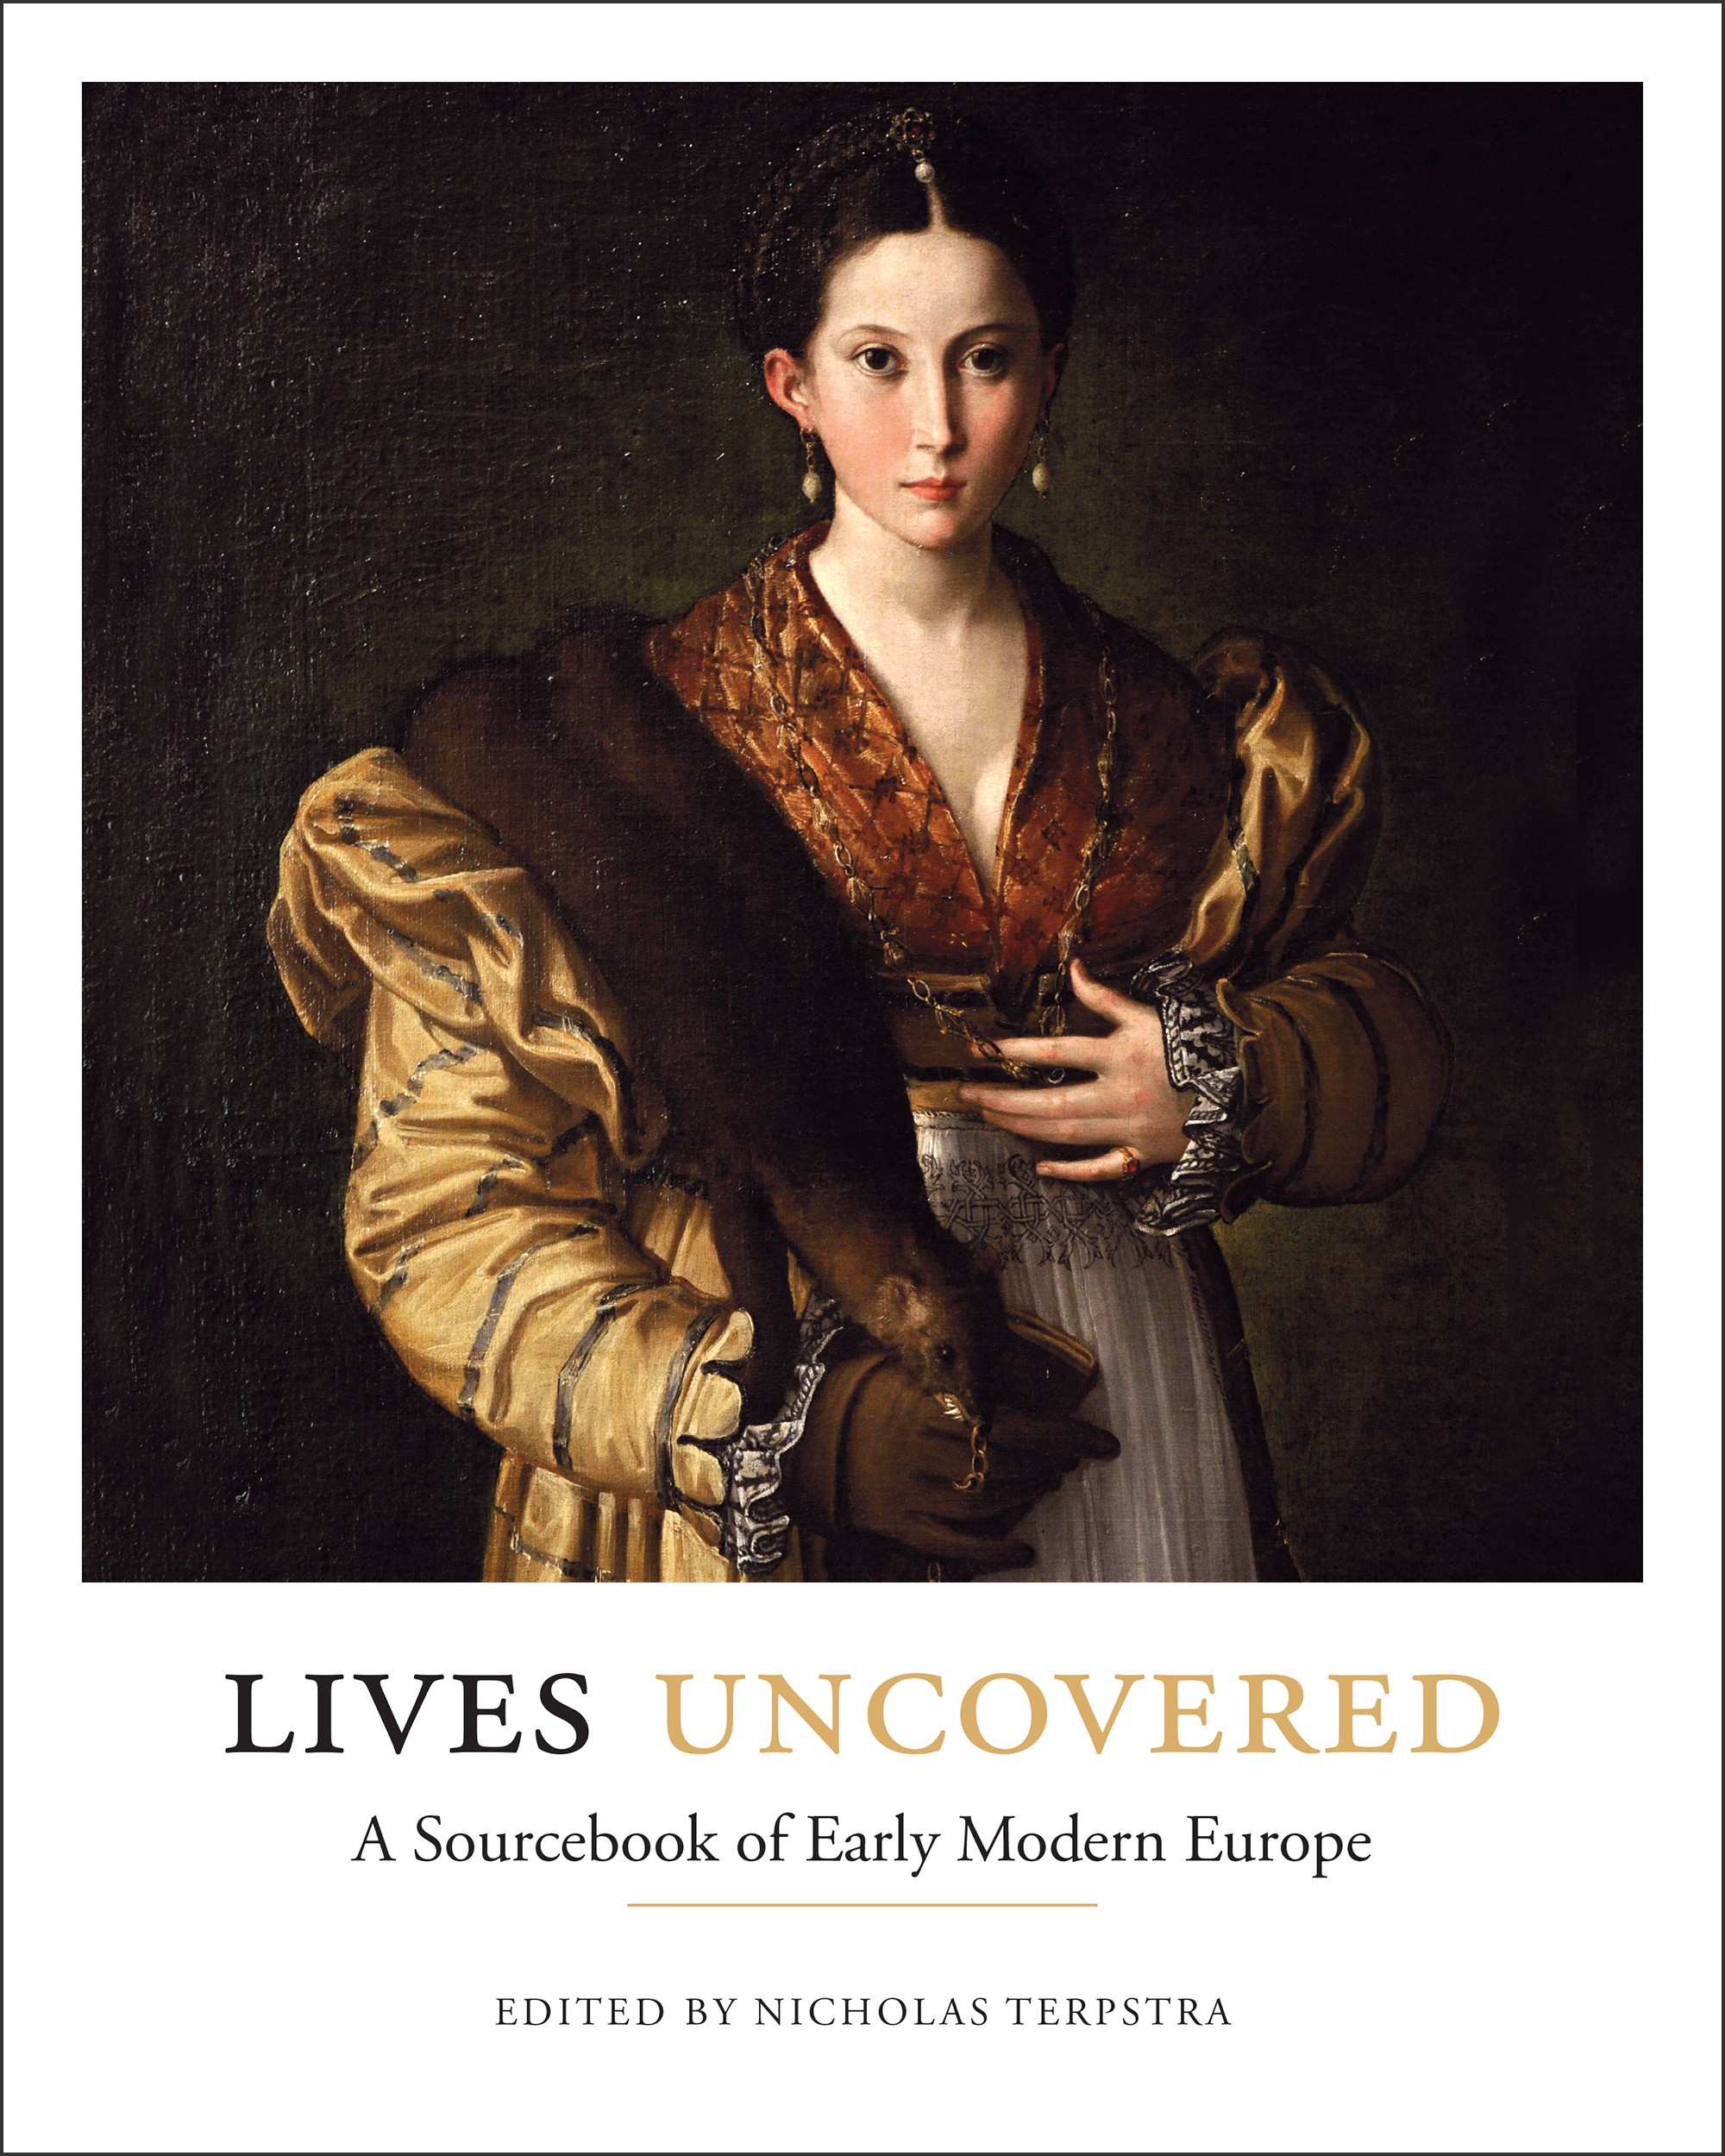 Book Cover of Lives Uncovered: A Sourcebook of Early Modern Europe